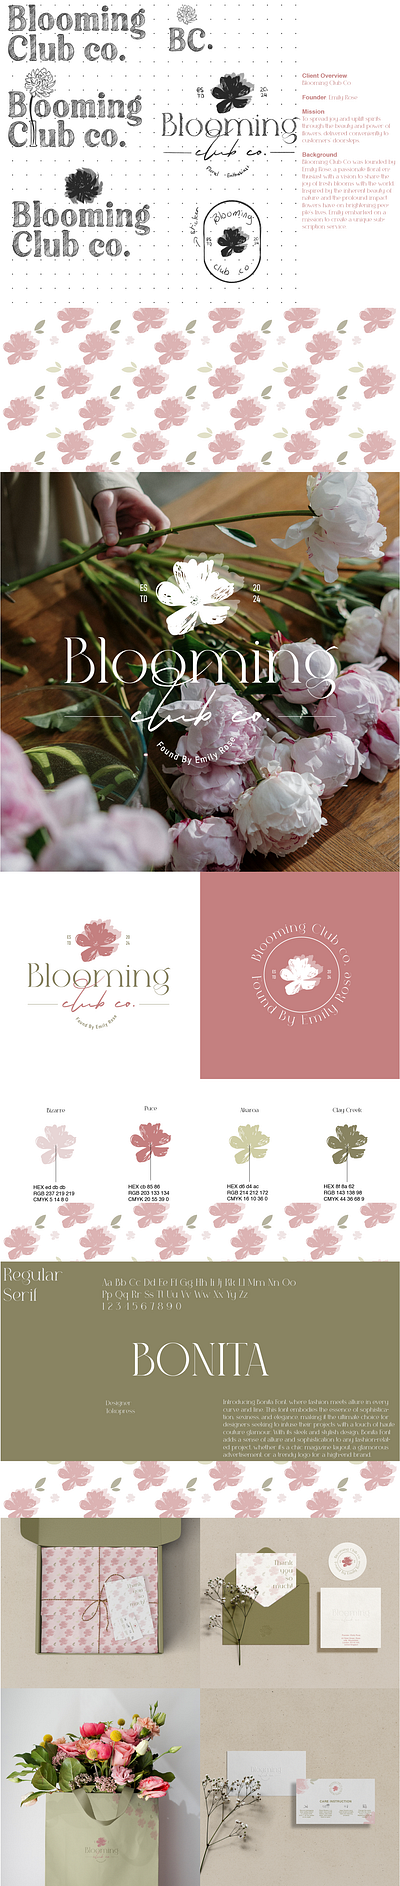 Brand Identity - Blooming Club Co. blooming brand identity branding care guide floristry graphic design greeting card illustration logo logocore logodesign procreate product design typography vector